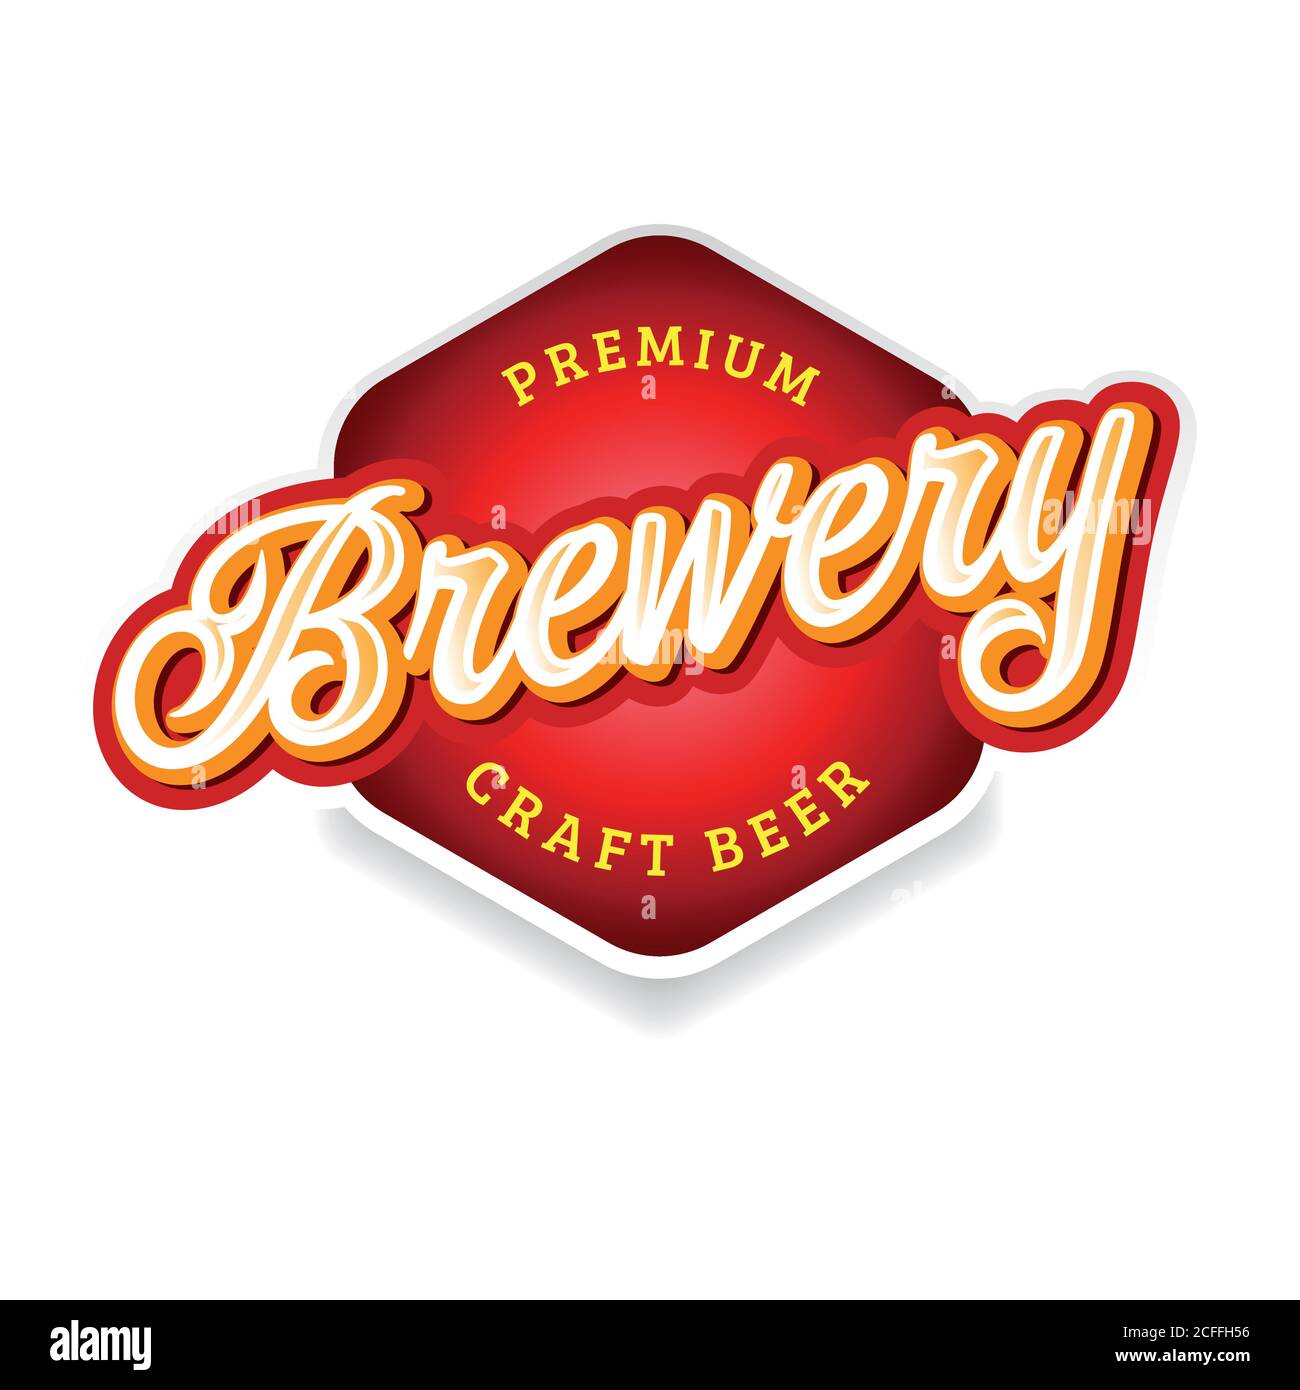 Brewery sign label lettering vintage Stock Vector